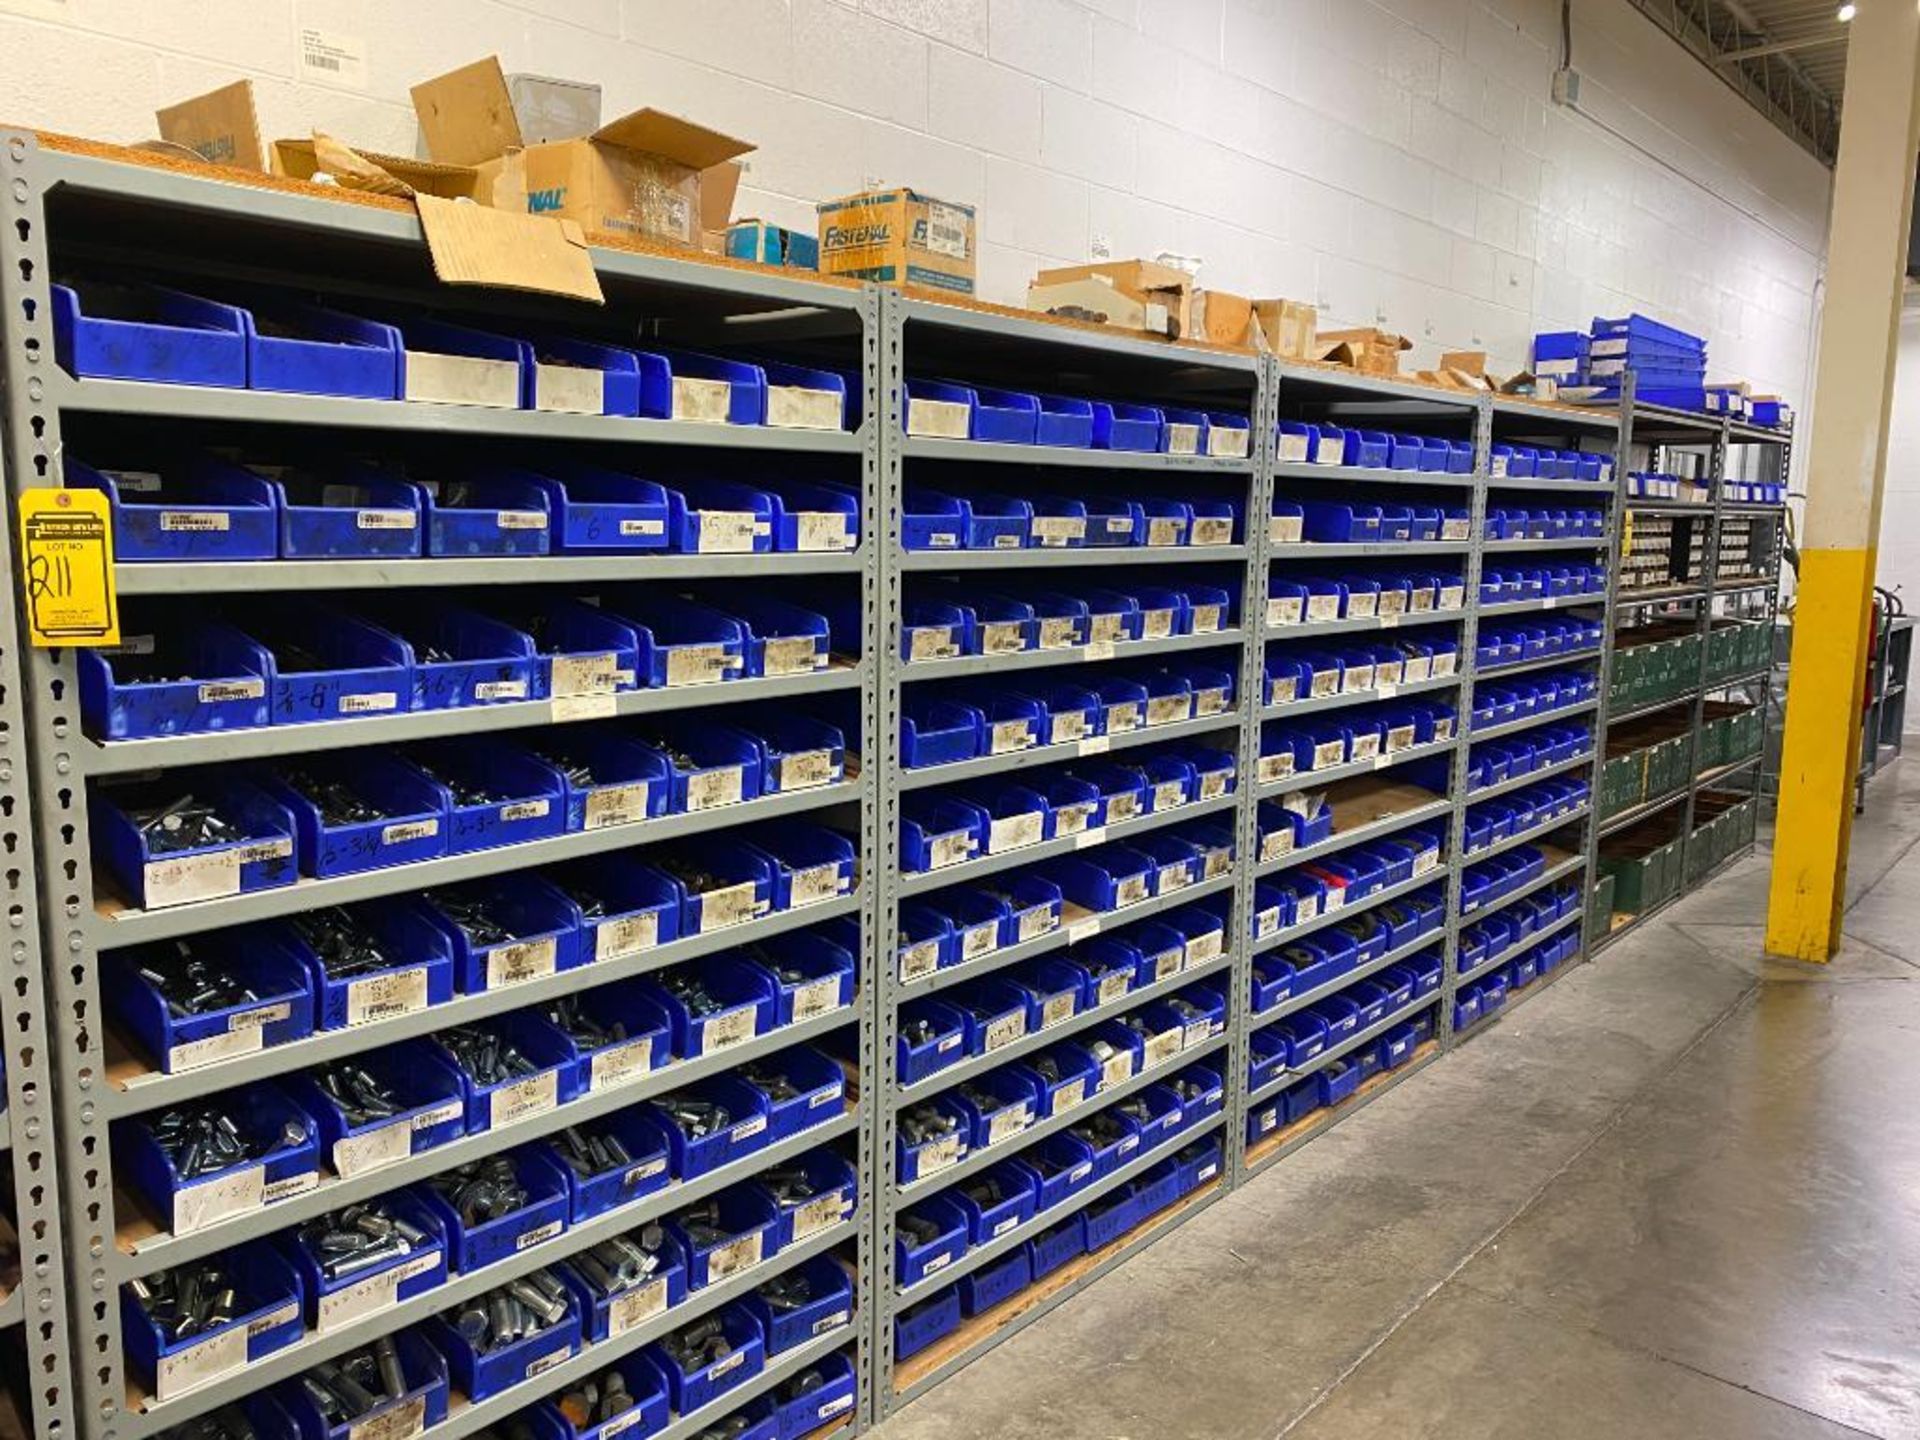 Content of (7) Sections of Maintenance Crib Shelving: Fasteners, Bolts, Nuts, Washers, 1/4"-2''